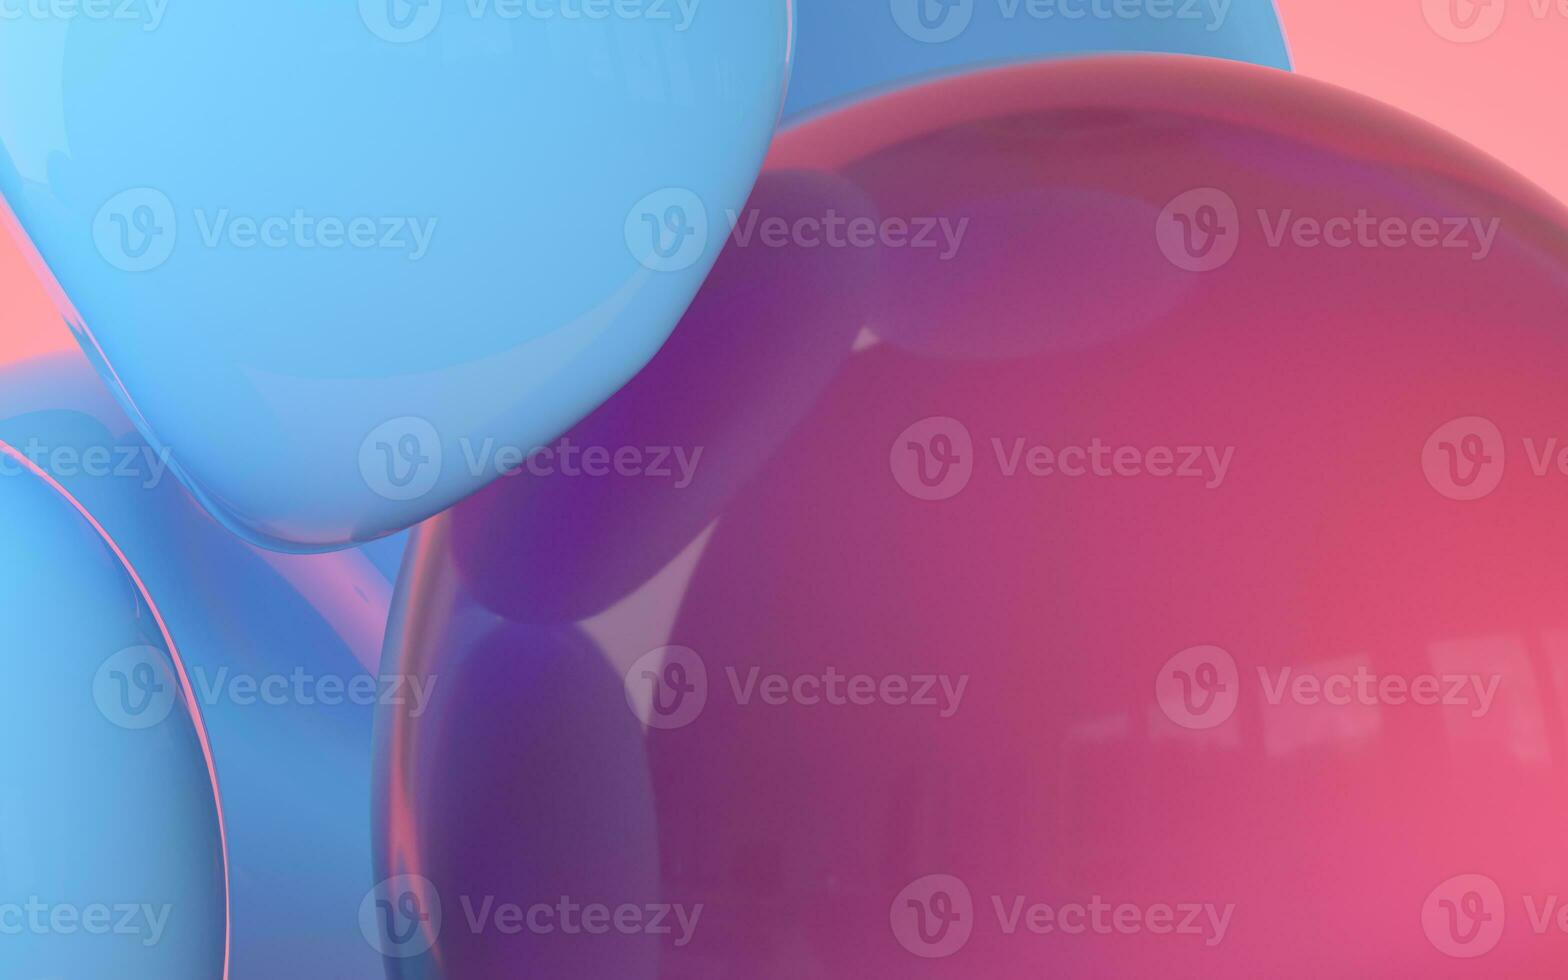 Bouncy and abstract balls, 3d rendering. photo